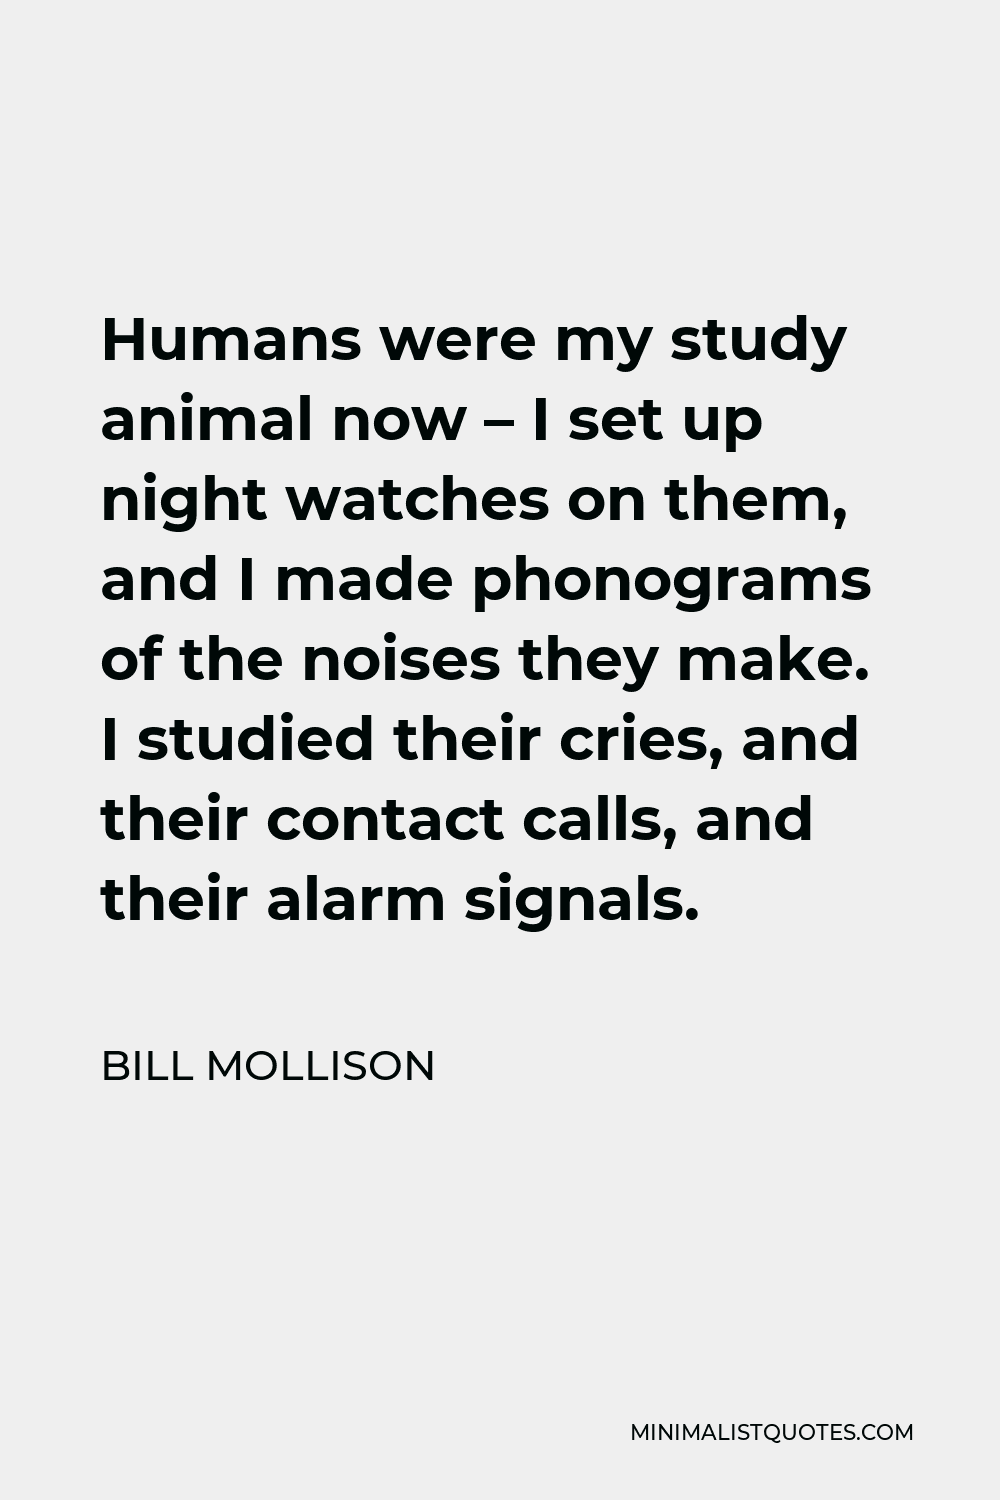 Bill Mollison Quote - Humans were my study animal now – I set up night watches on them, and I made phonograms of the noises they make. I studied their cries, and their contact calls, and their alarm signals.